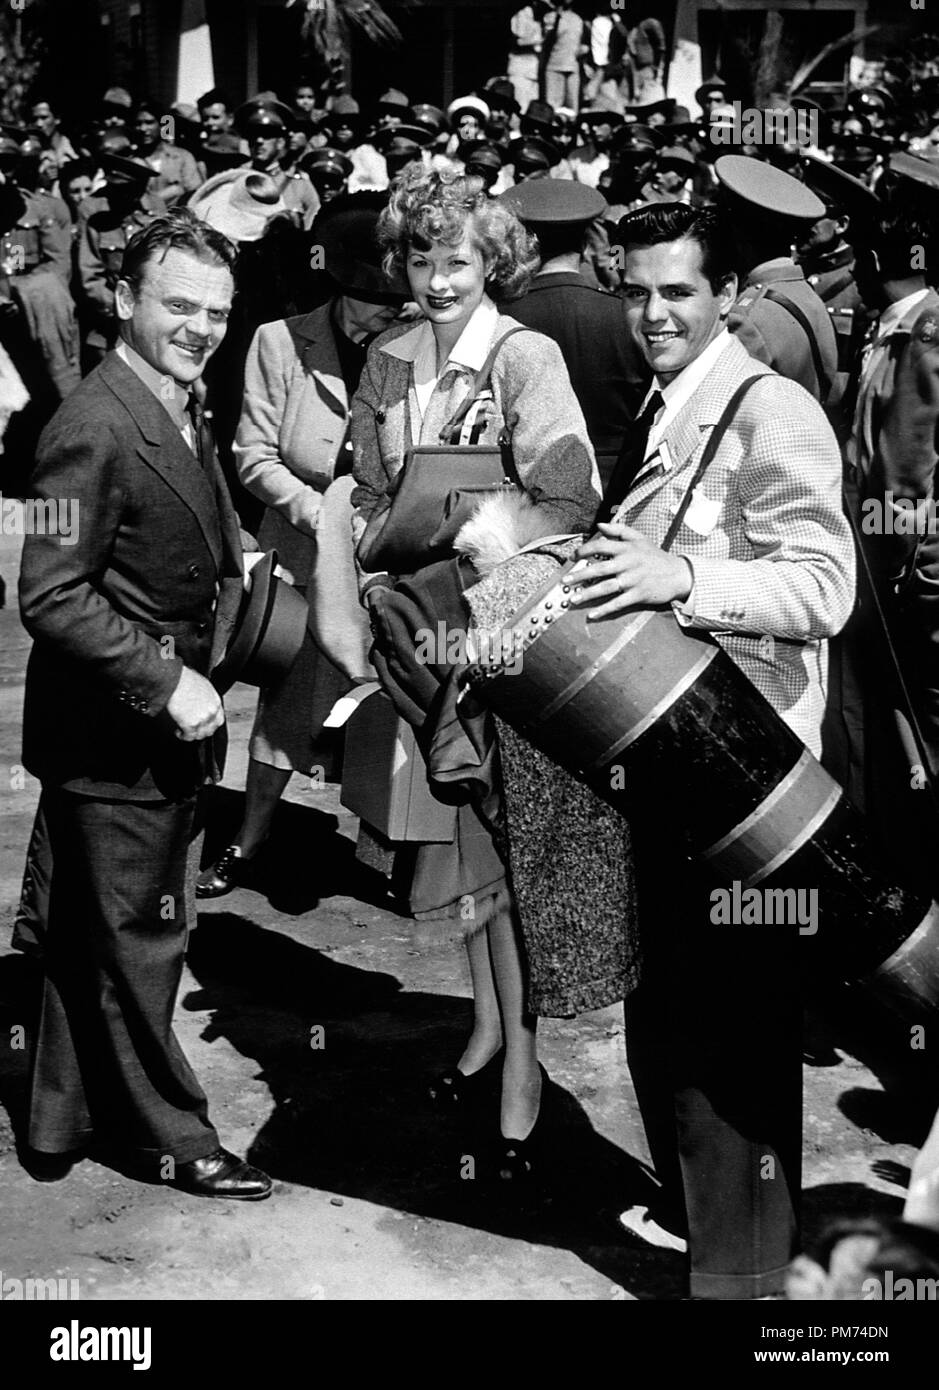 Studio Publicity Still: James Cagney, Lucille Ball, and Desi Arnaz, circa 1950   File Reference # 30928 1102THA Stock Photo